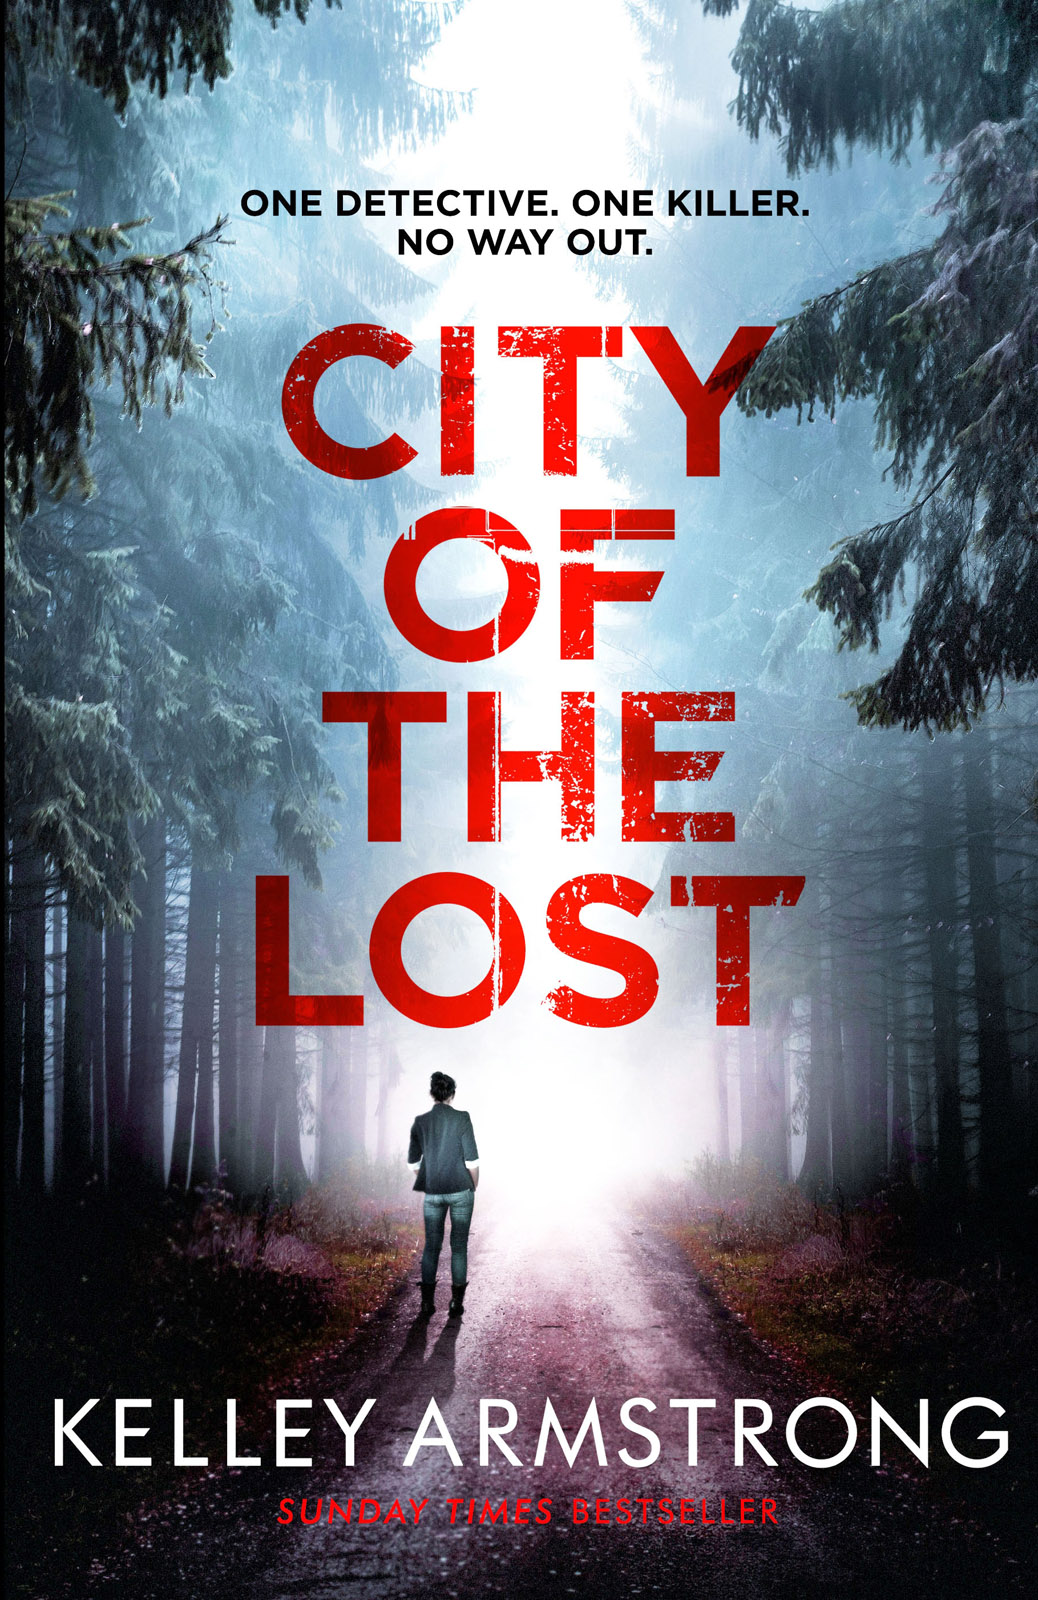 City of the Lost (2015)